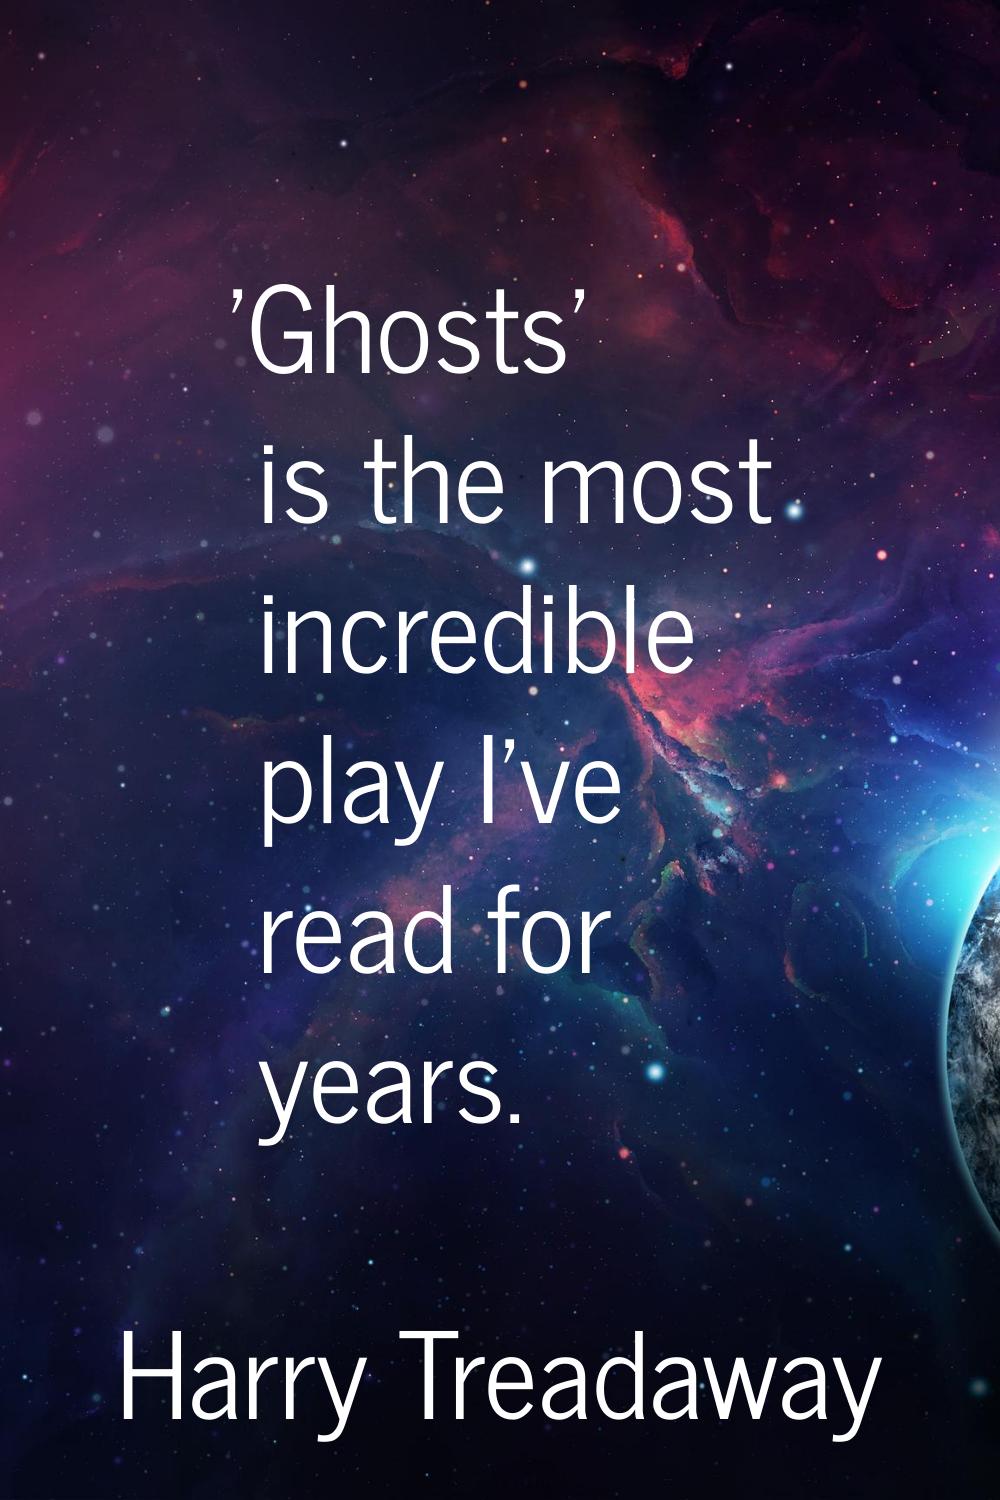 'Ghosts' is the most incredible play I've read for years.